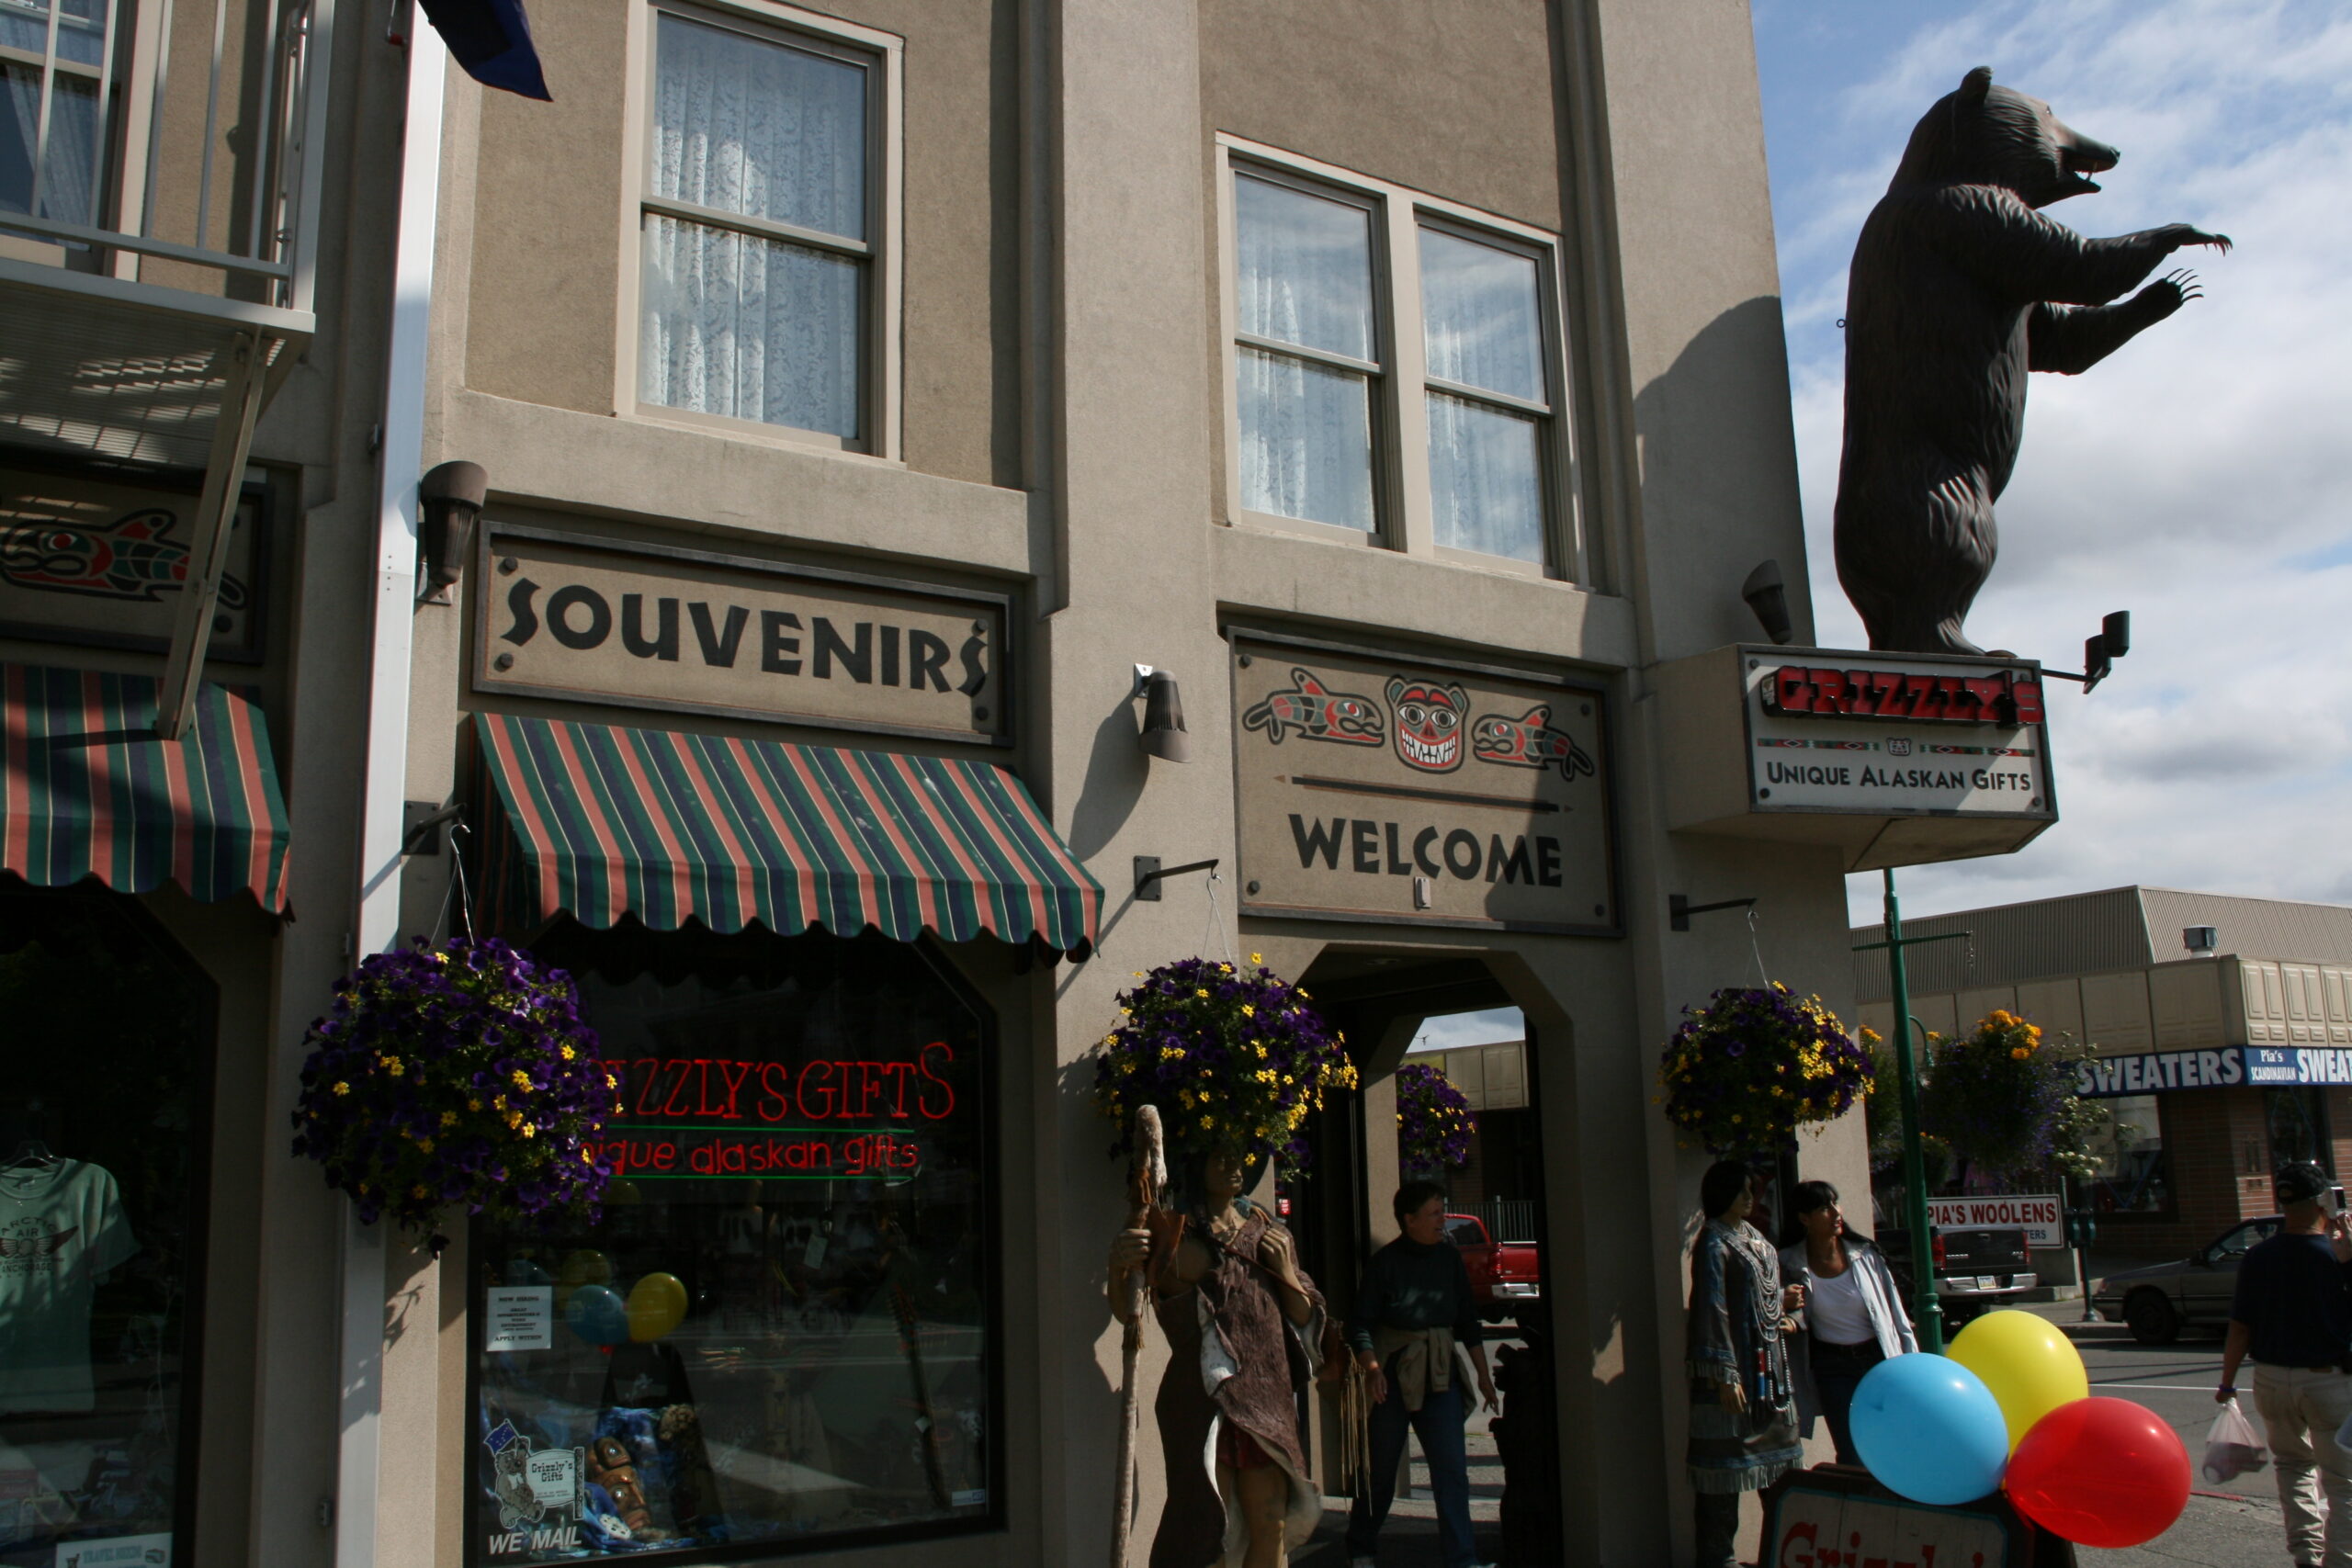 A plastic bear greets customers of Grizzly's Unique Alaskan Gifts in downtown Anchorage, Alaska.